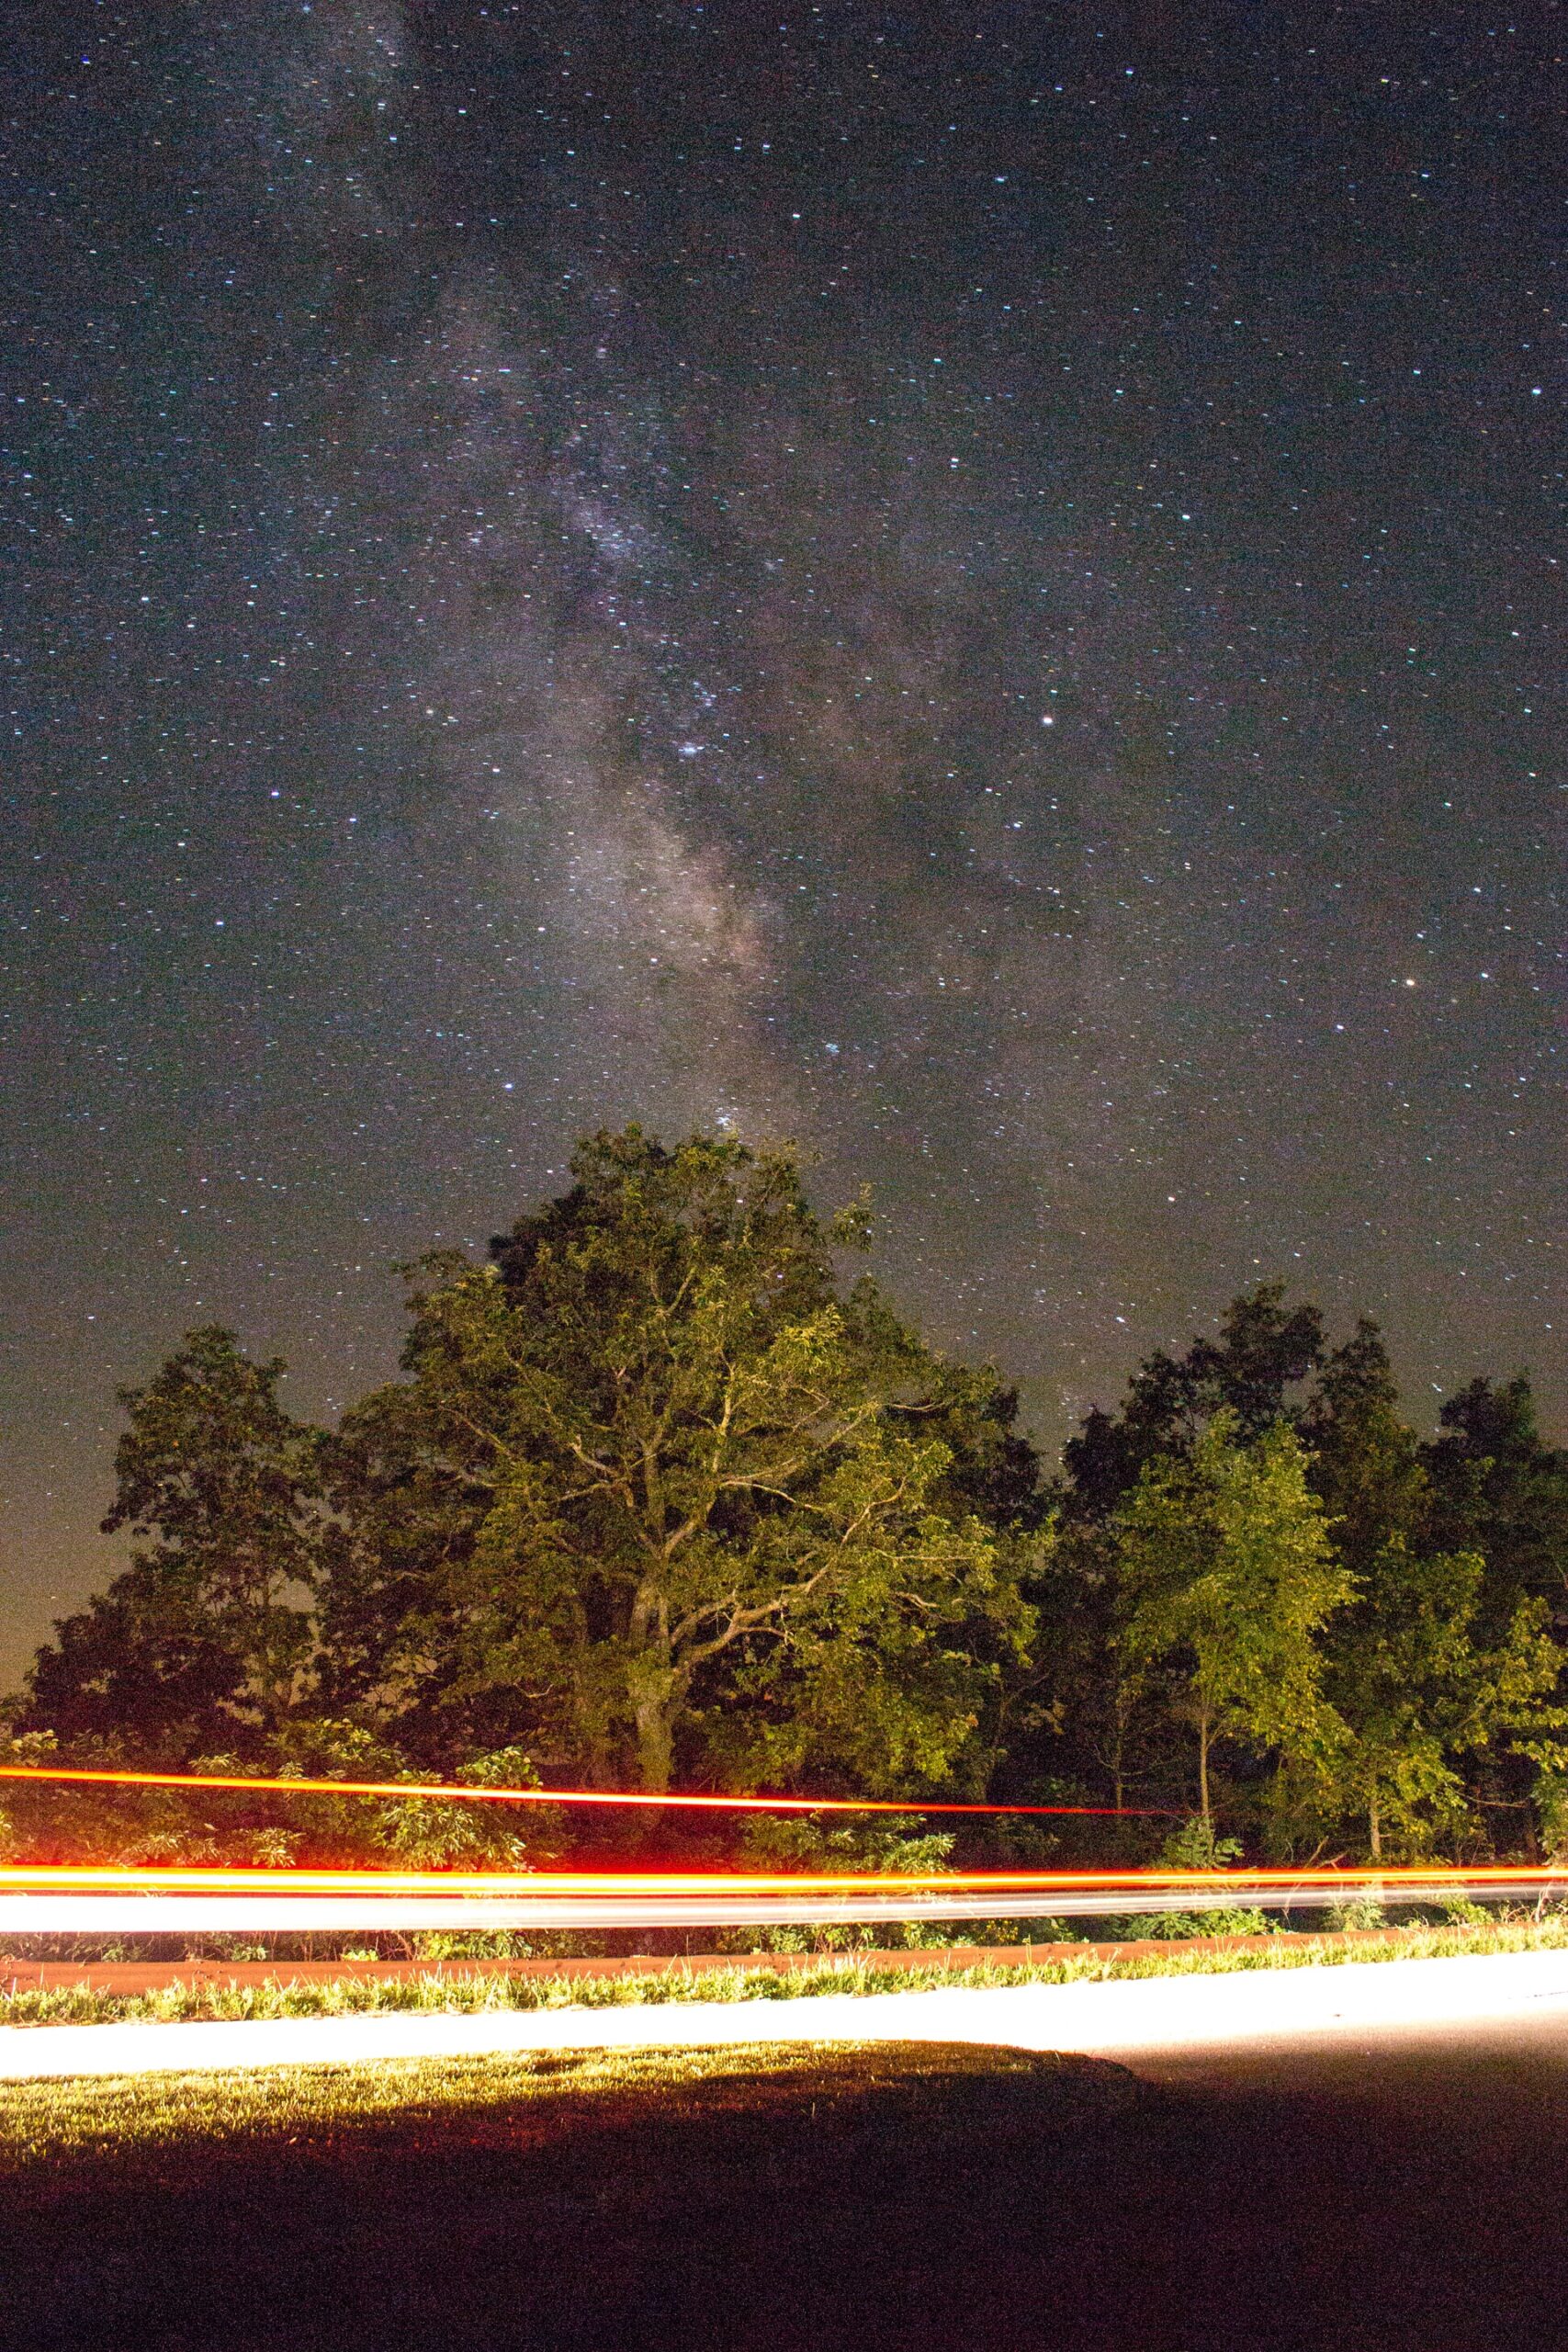 Cherohala Skyway is one of the best scenic drives in Tennessee (photo: Brad Mann)